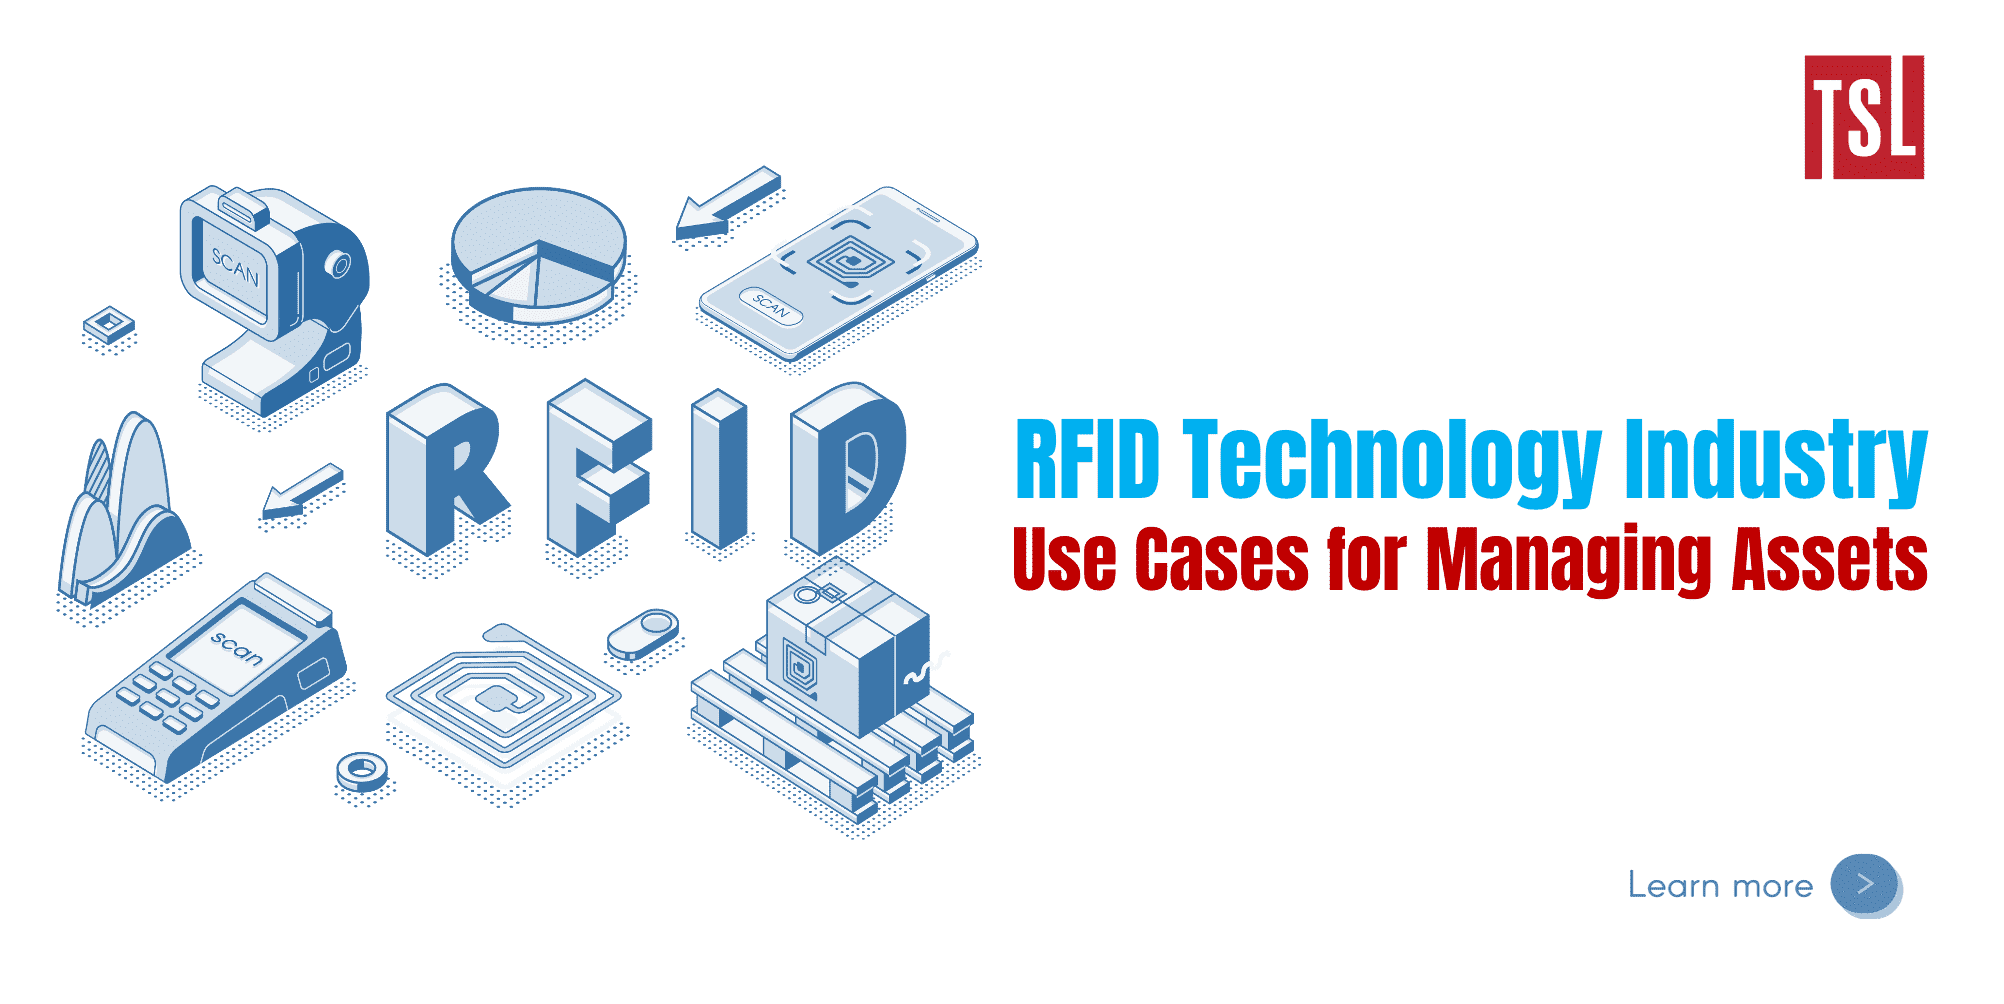 RFID Technology Industry Use Cases for Managing Assets